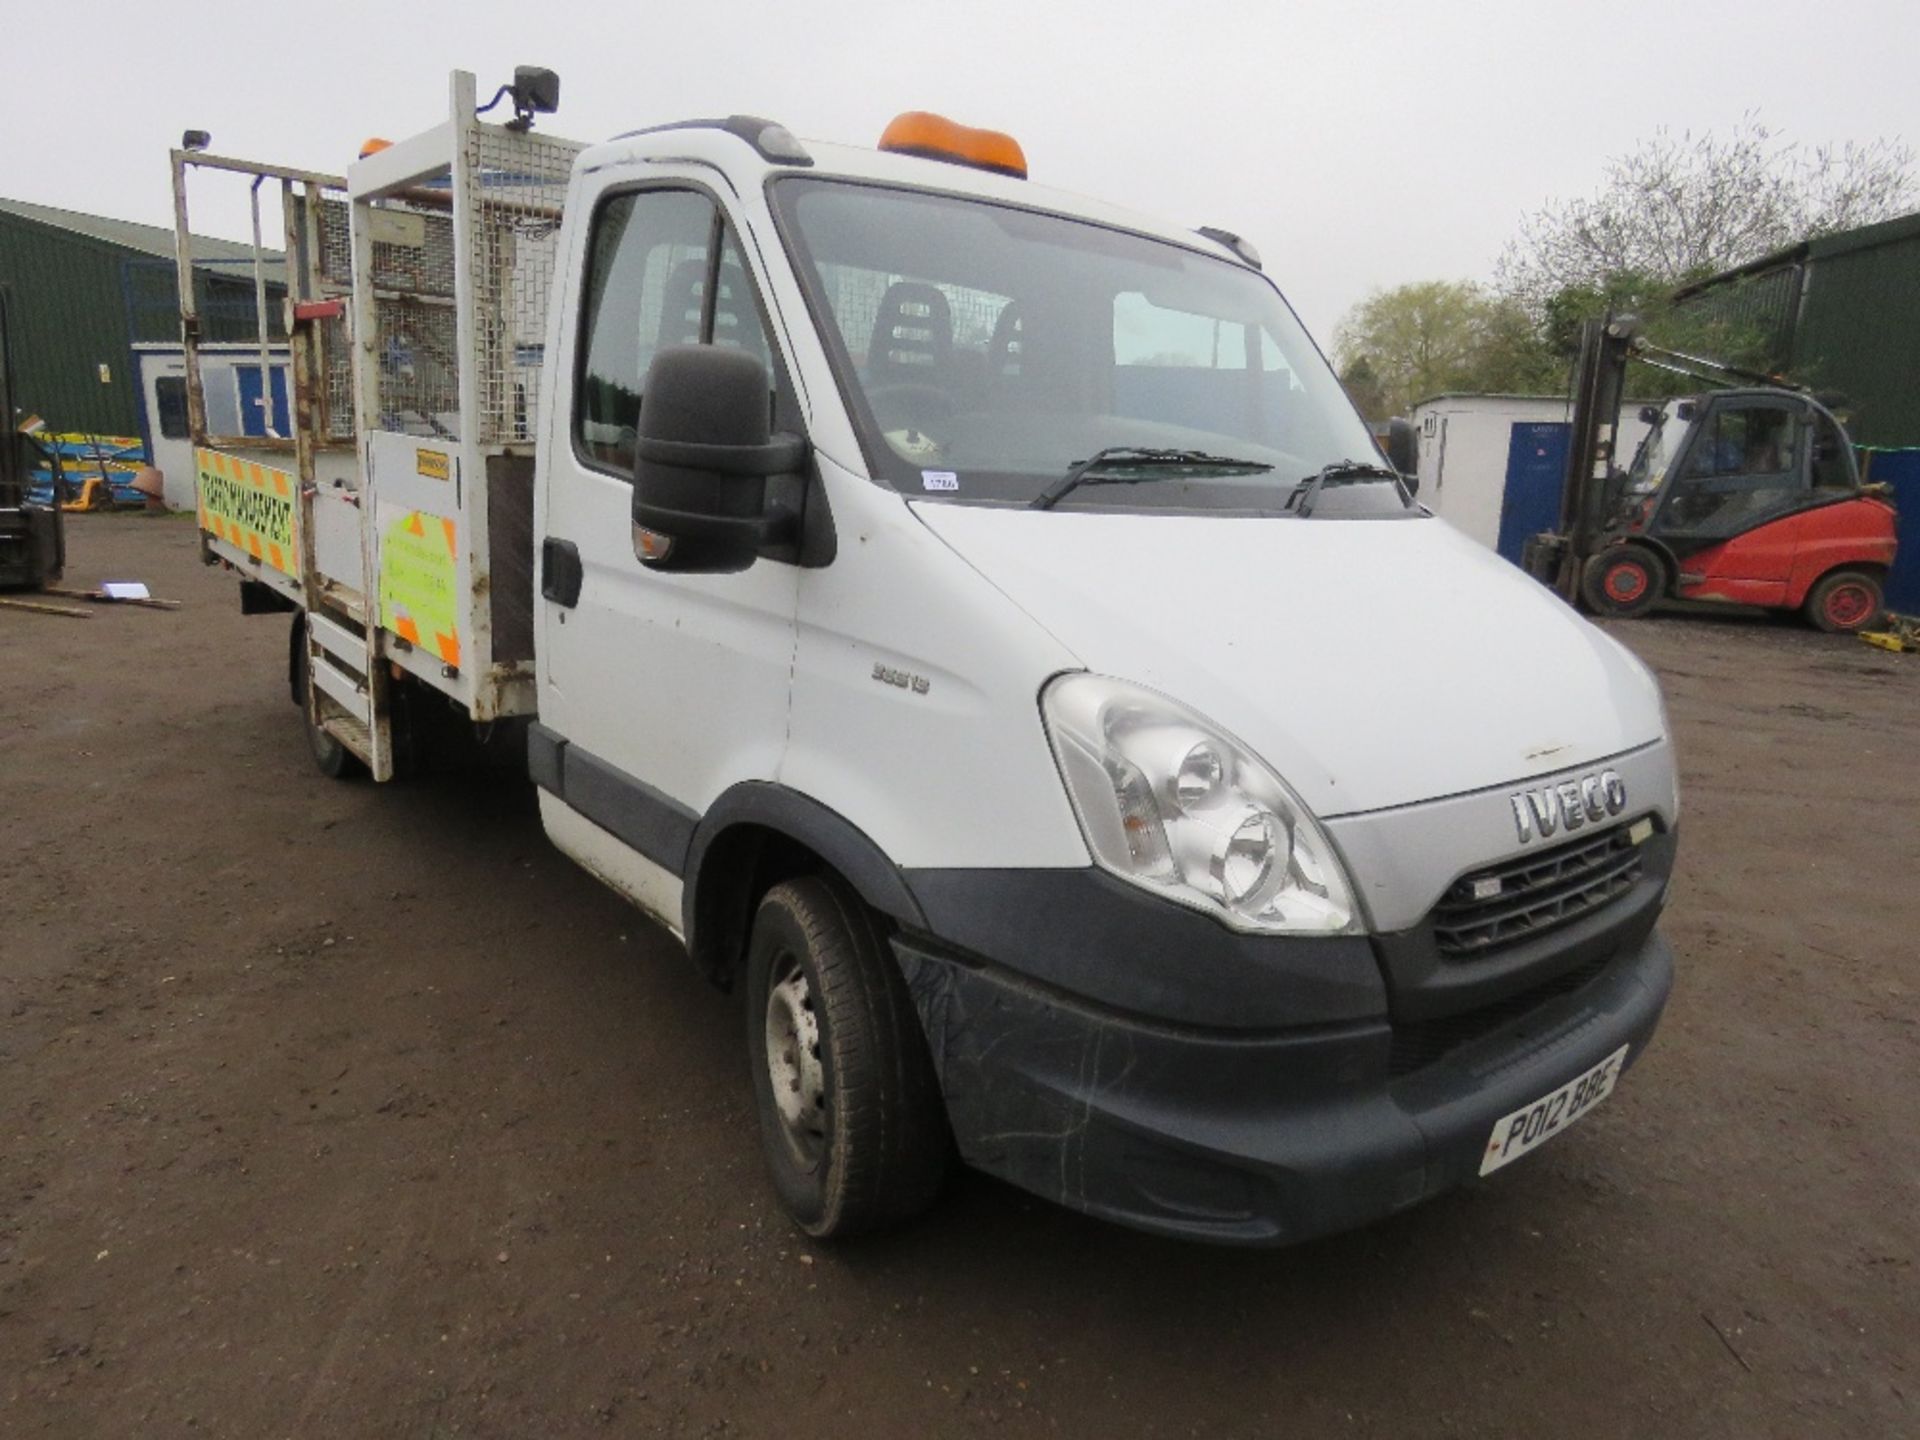 IVECO 35S13 TRAFFIC MANAGEMENT 3.5 TONNE DROP SIDE TRUCK REG: PO12 BBE. WITH V5 AND MOT UNTIL 26/04/